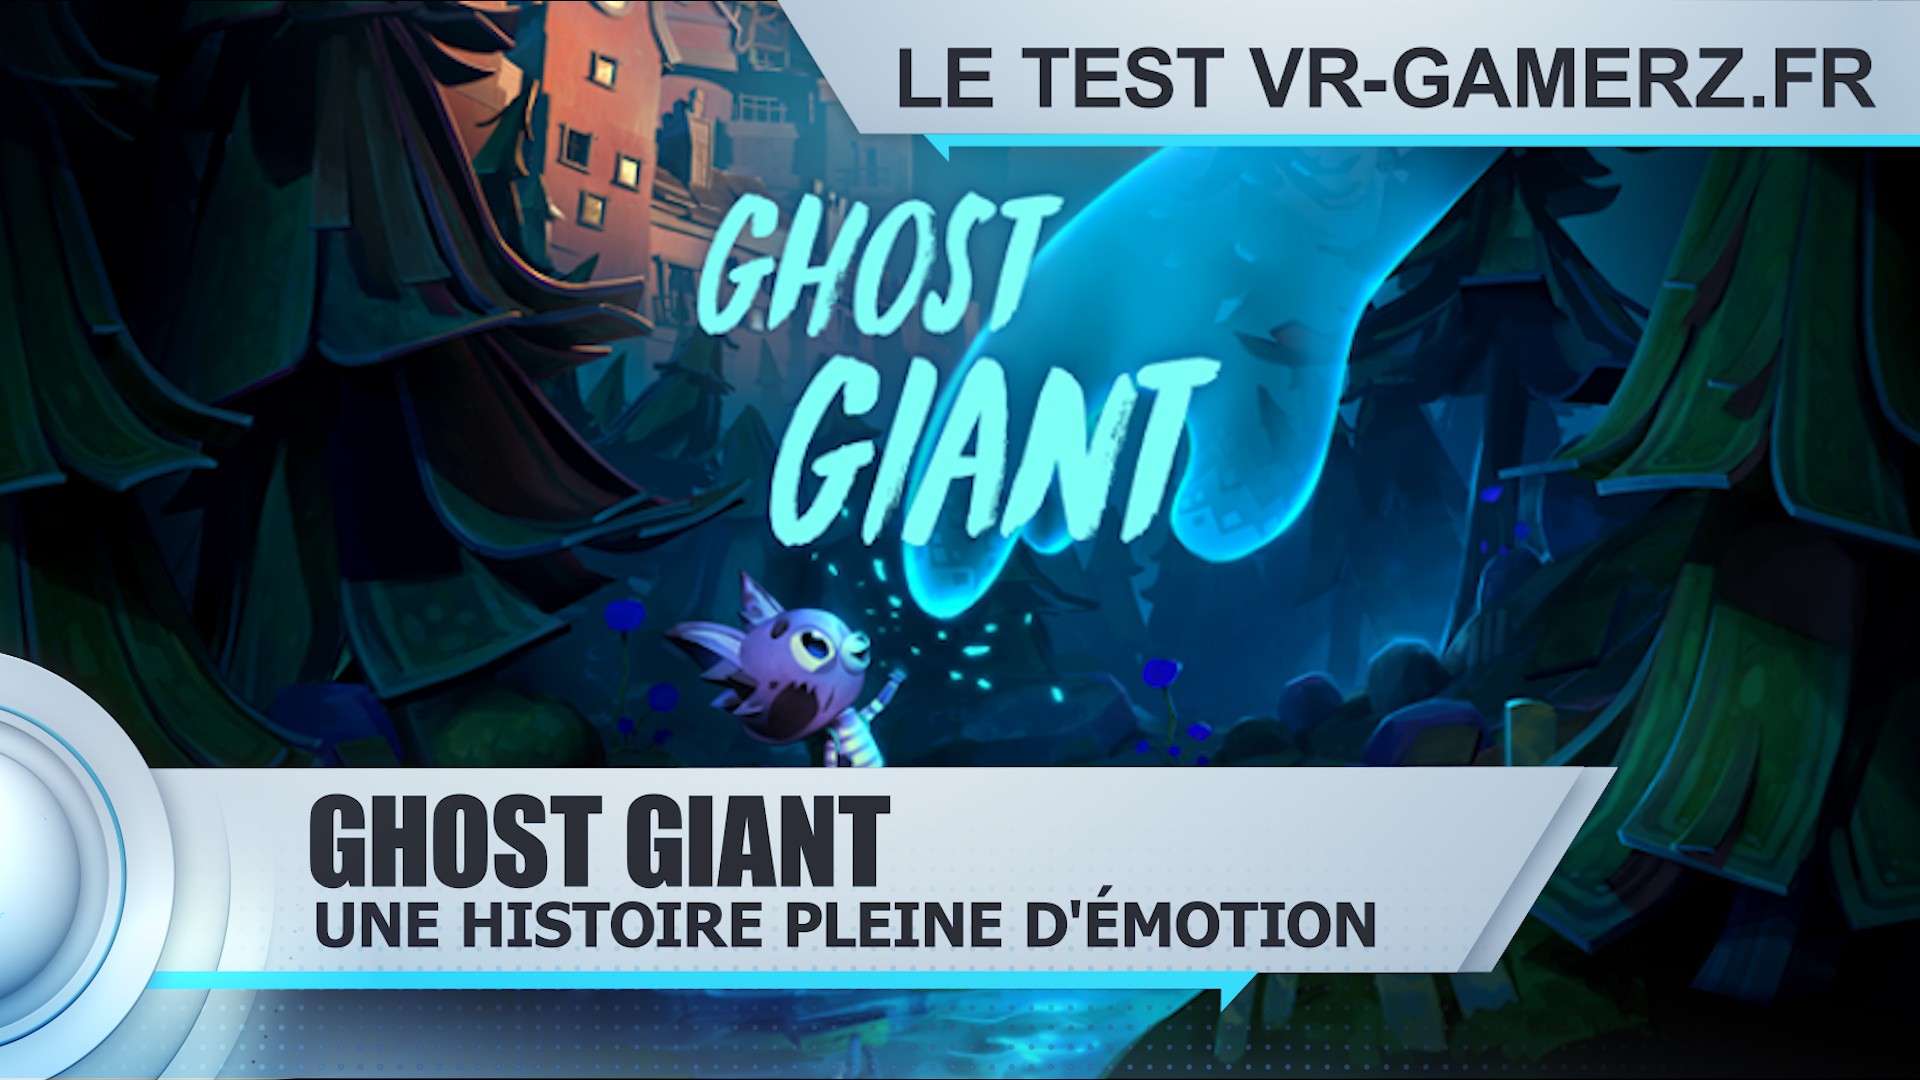 ghost giant oculus quest download free